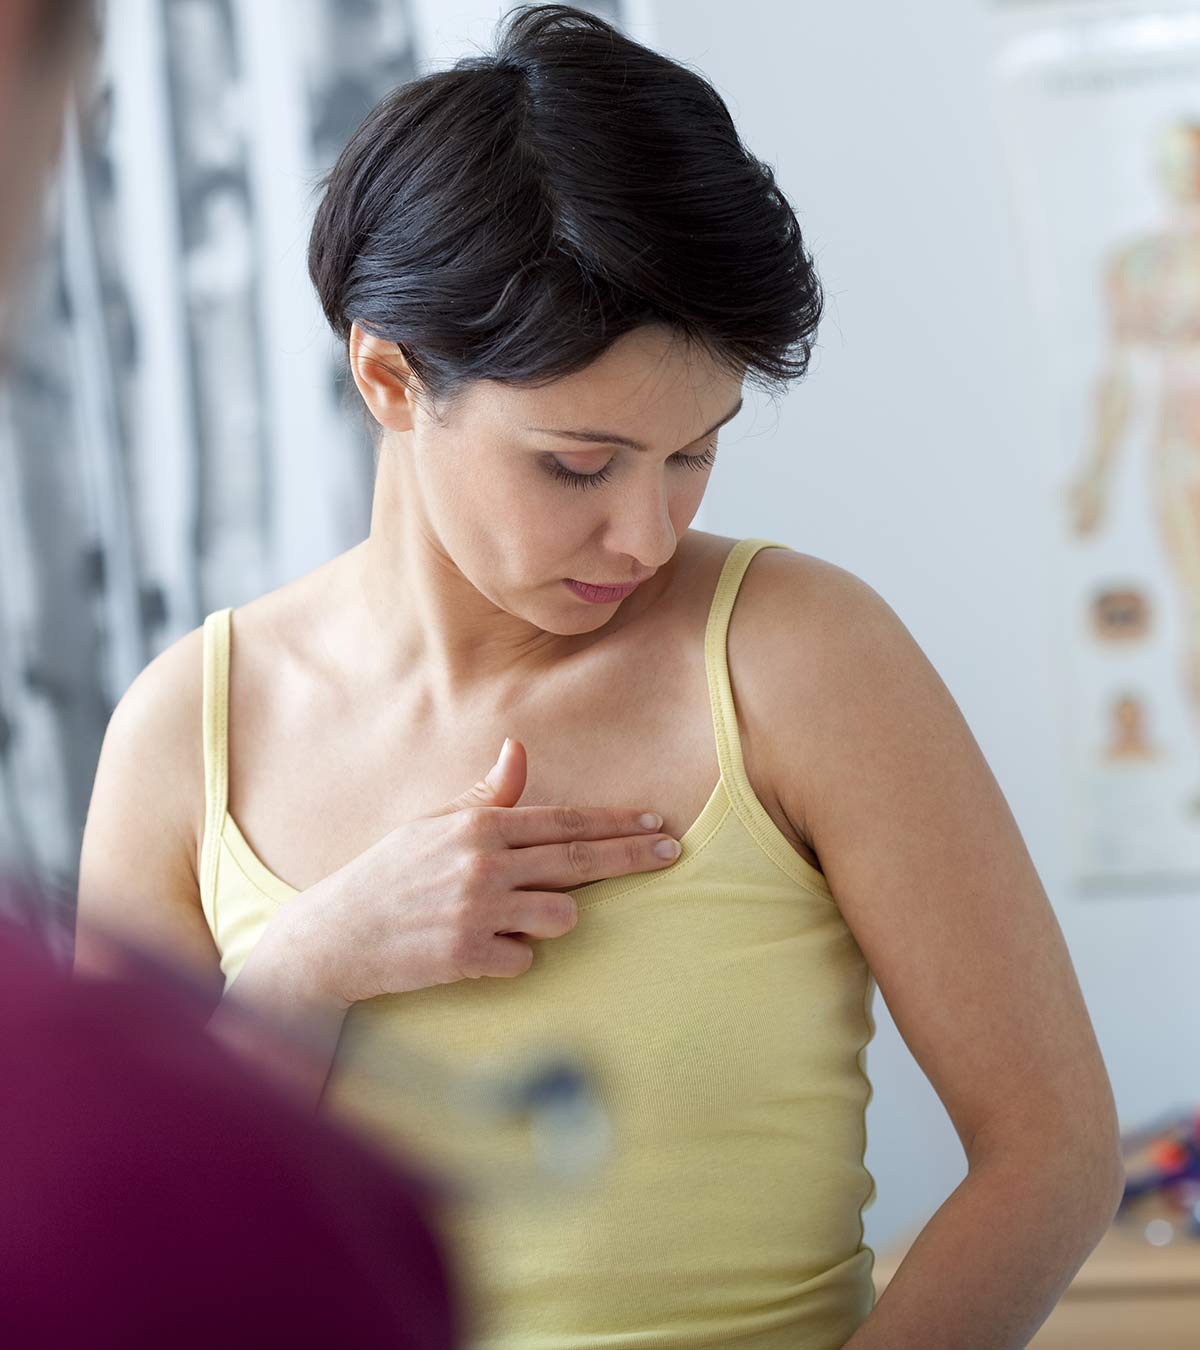 Saggy Breasts After Pregnancy/Breastfeeding: Causes And Prevention